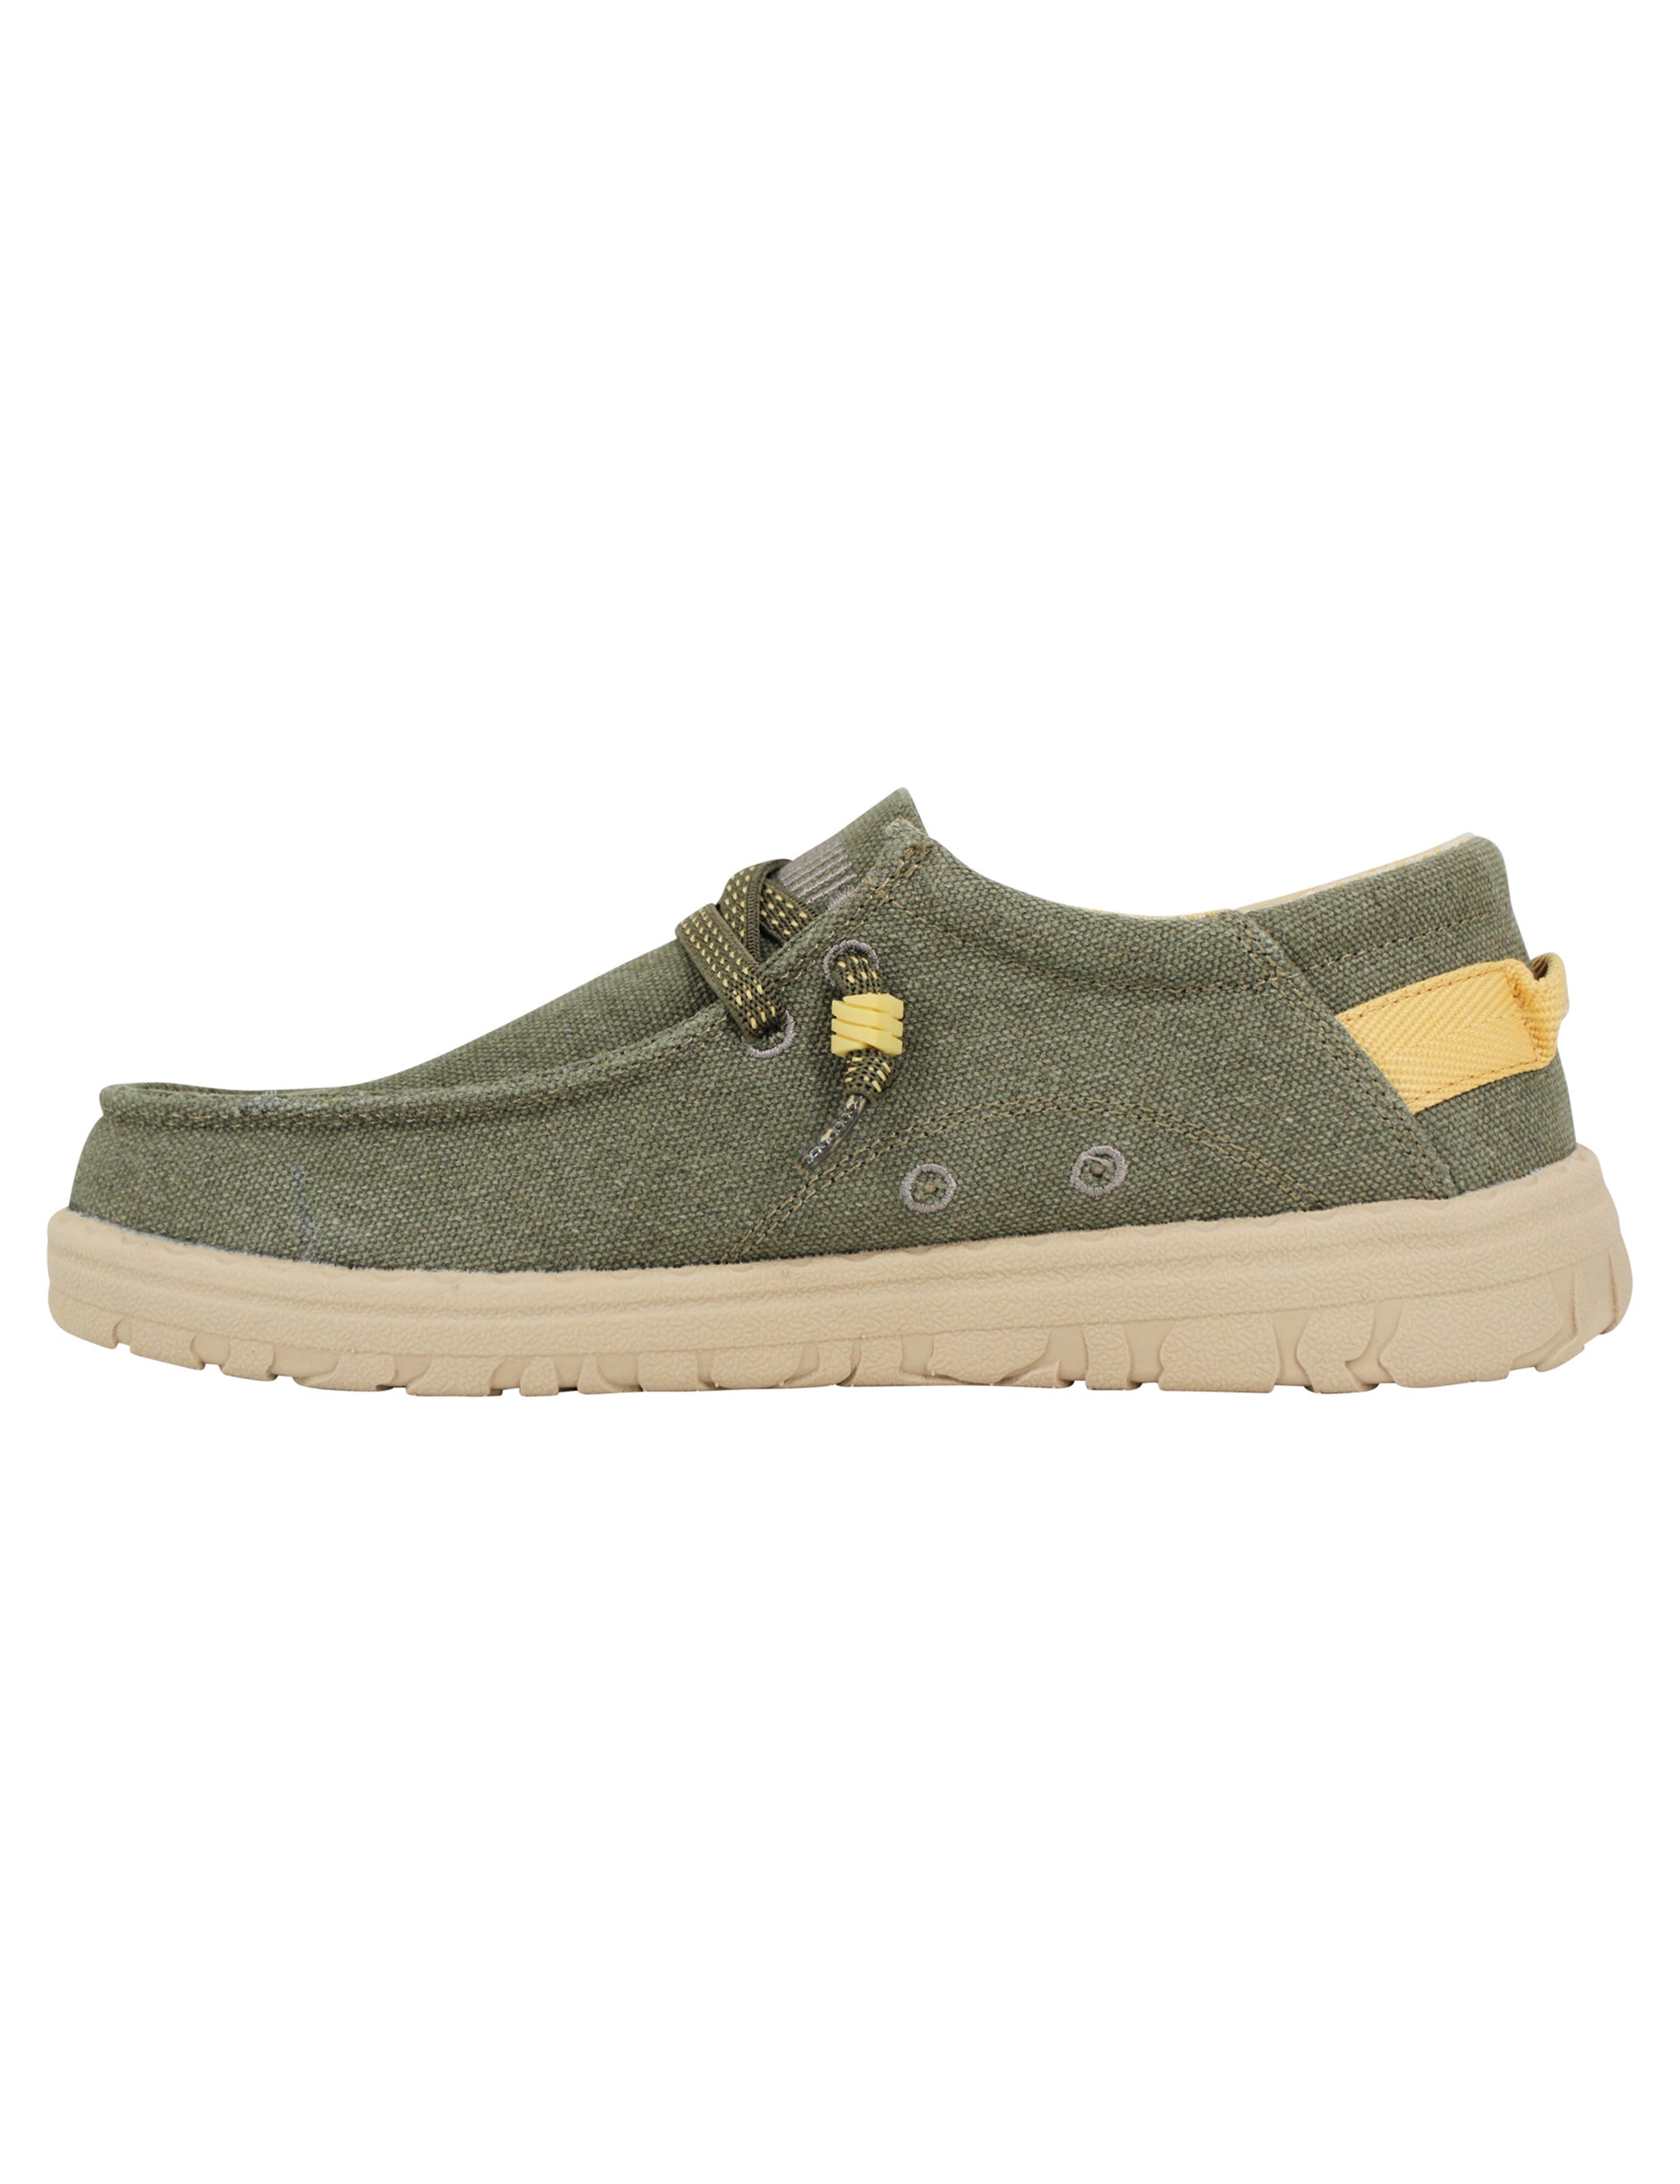 Samoa Wallabee men's lace-ups in green fabric with extra light sole